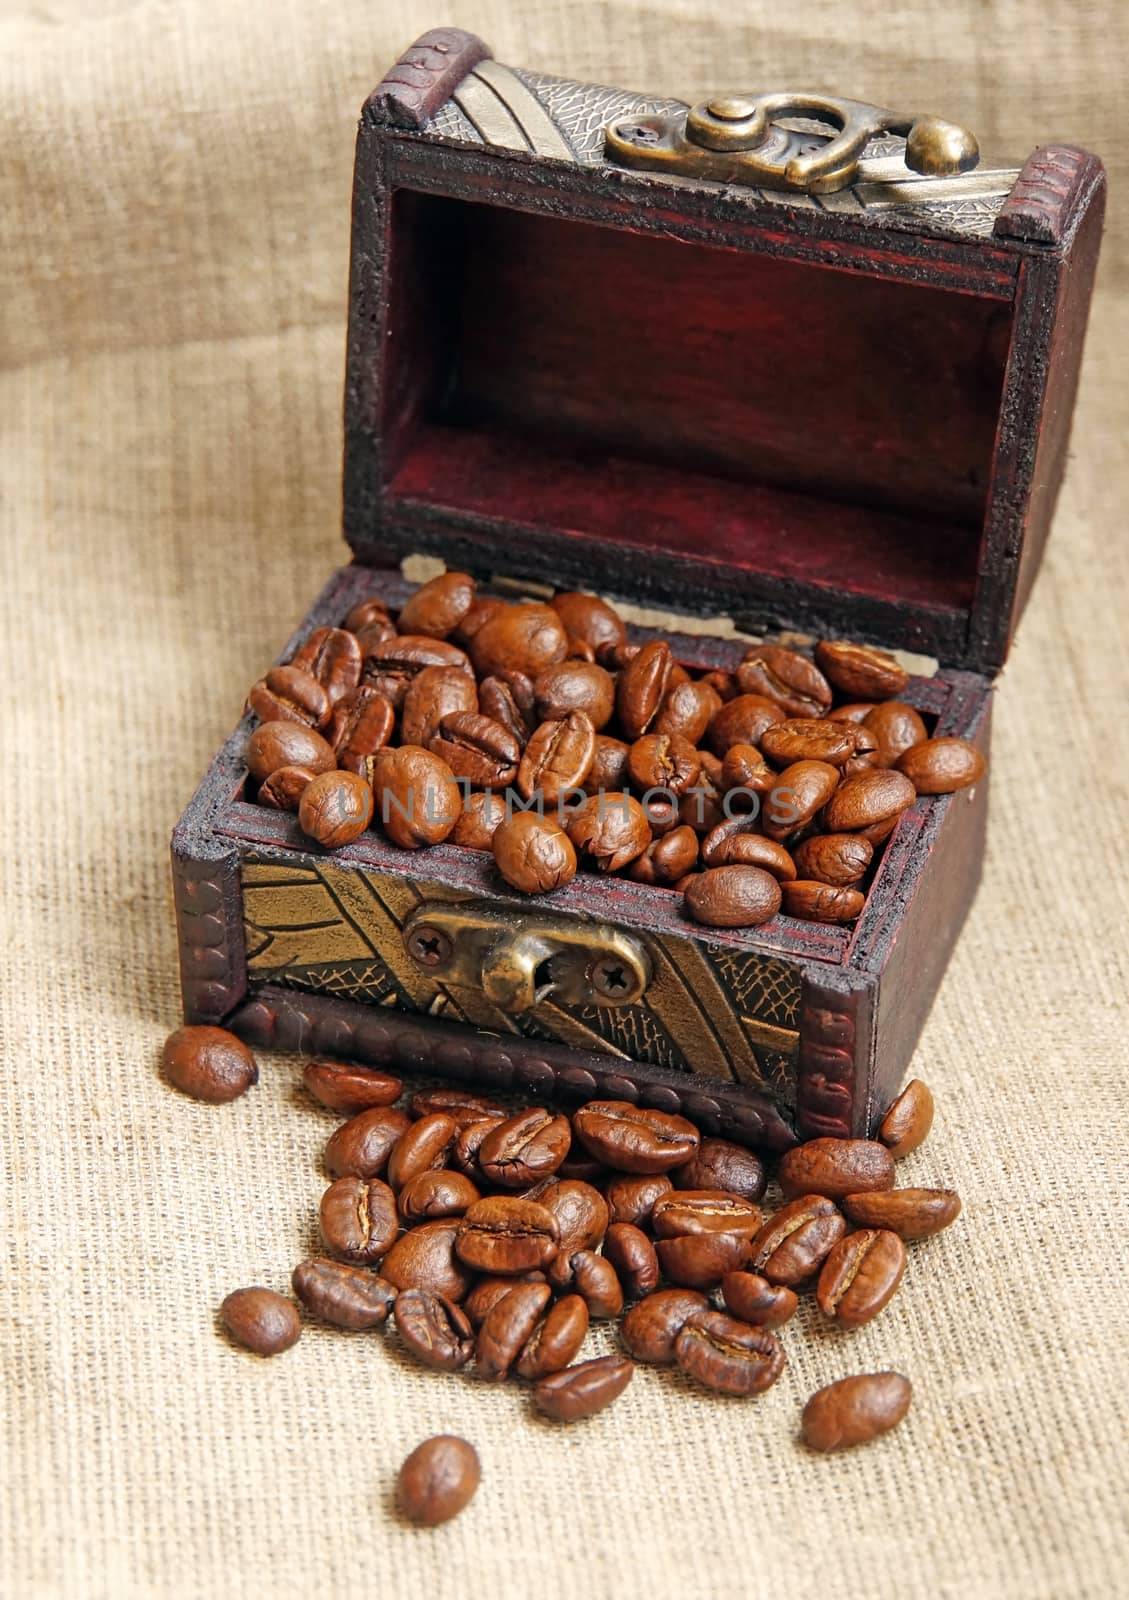  Vintage wooden box with coffee beans close-up on a woven fabric                              